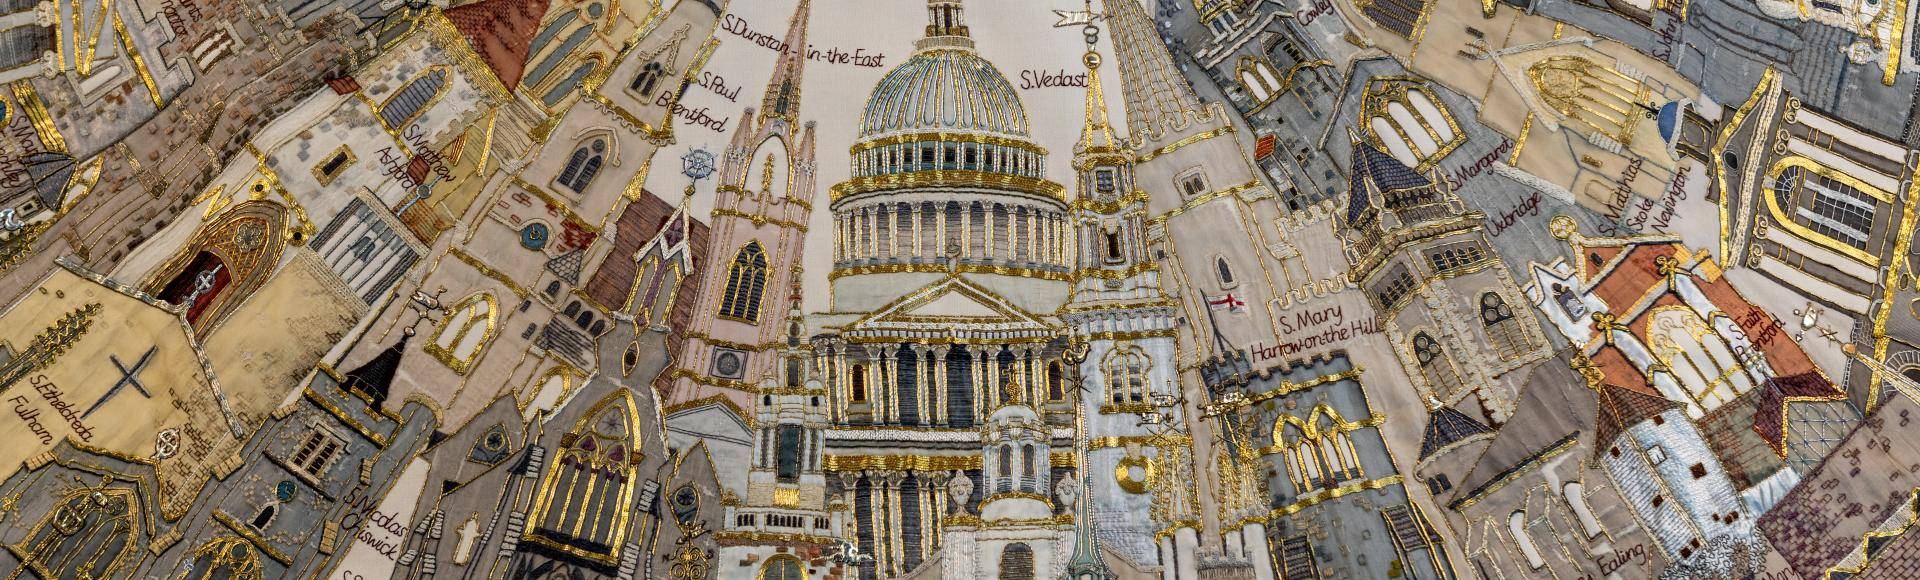 Close up of embroidery on Jubilee Cope depicting St Paul's and Diocese of London churches